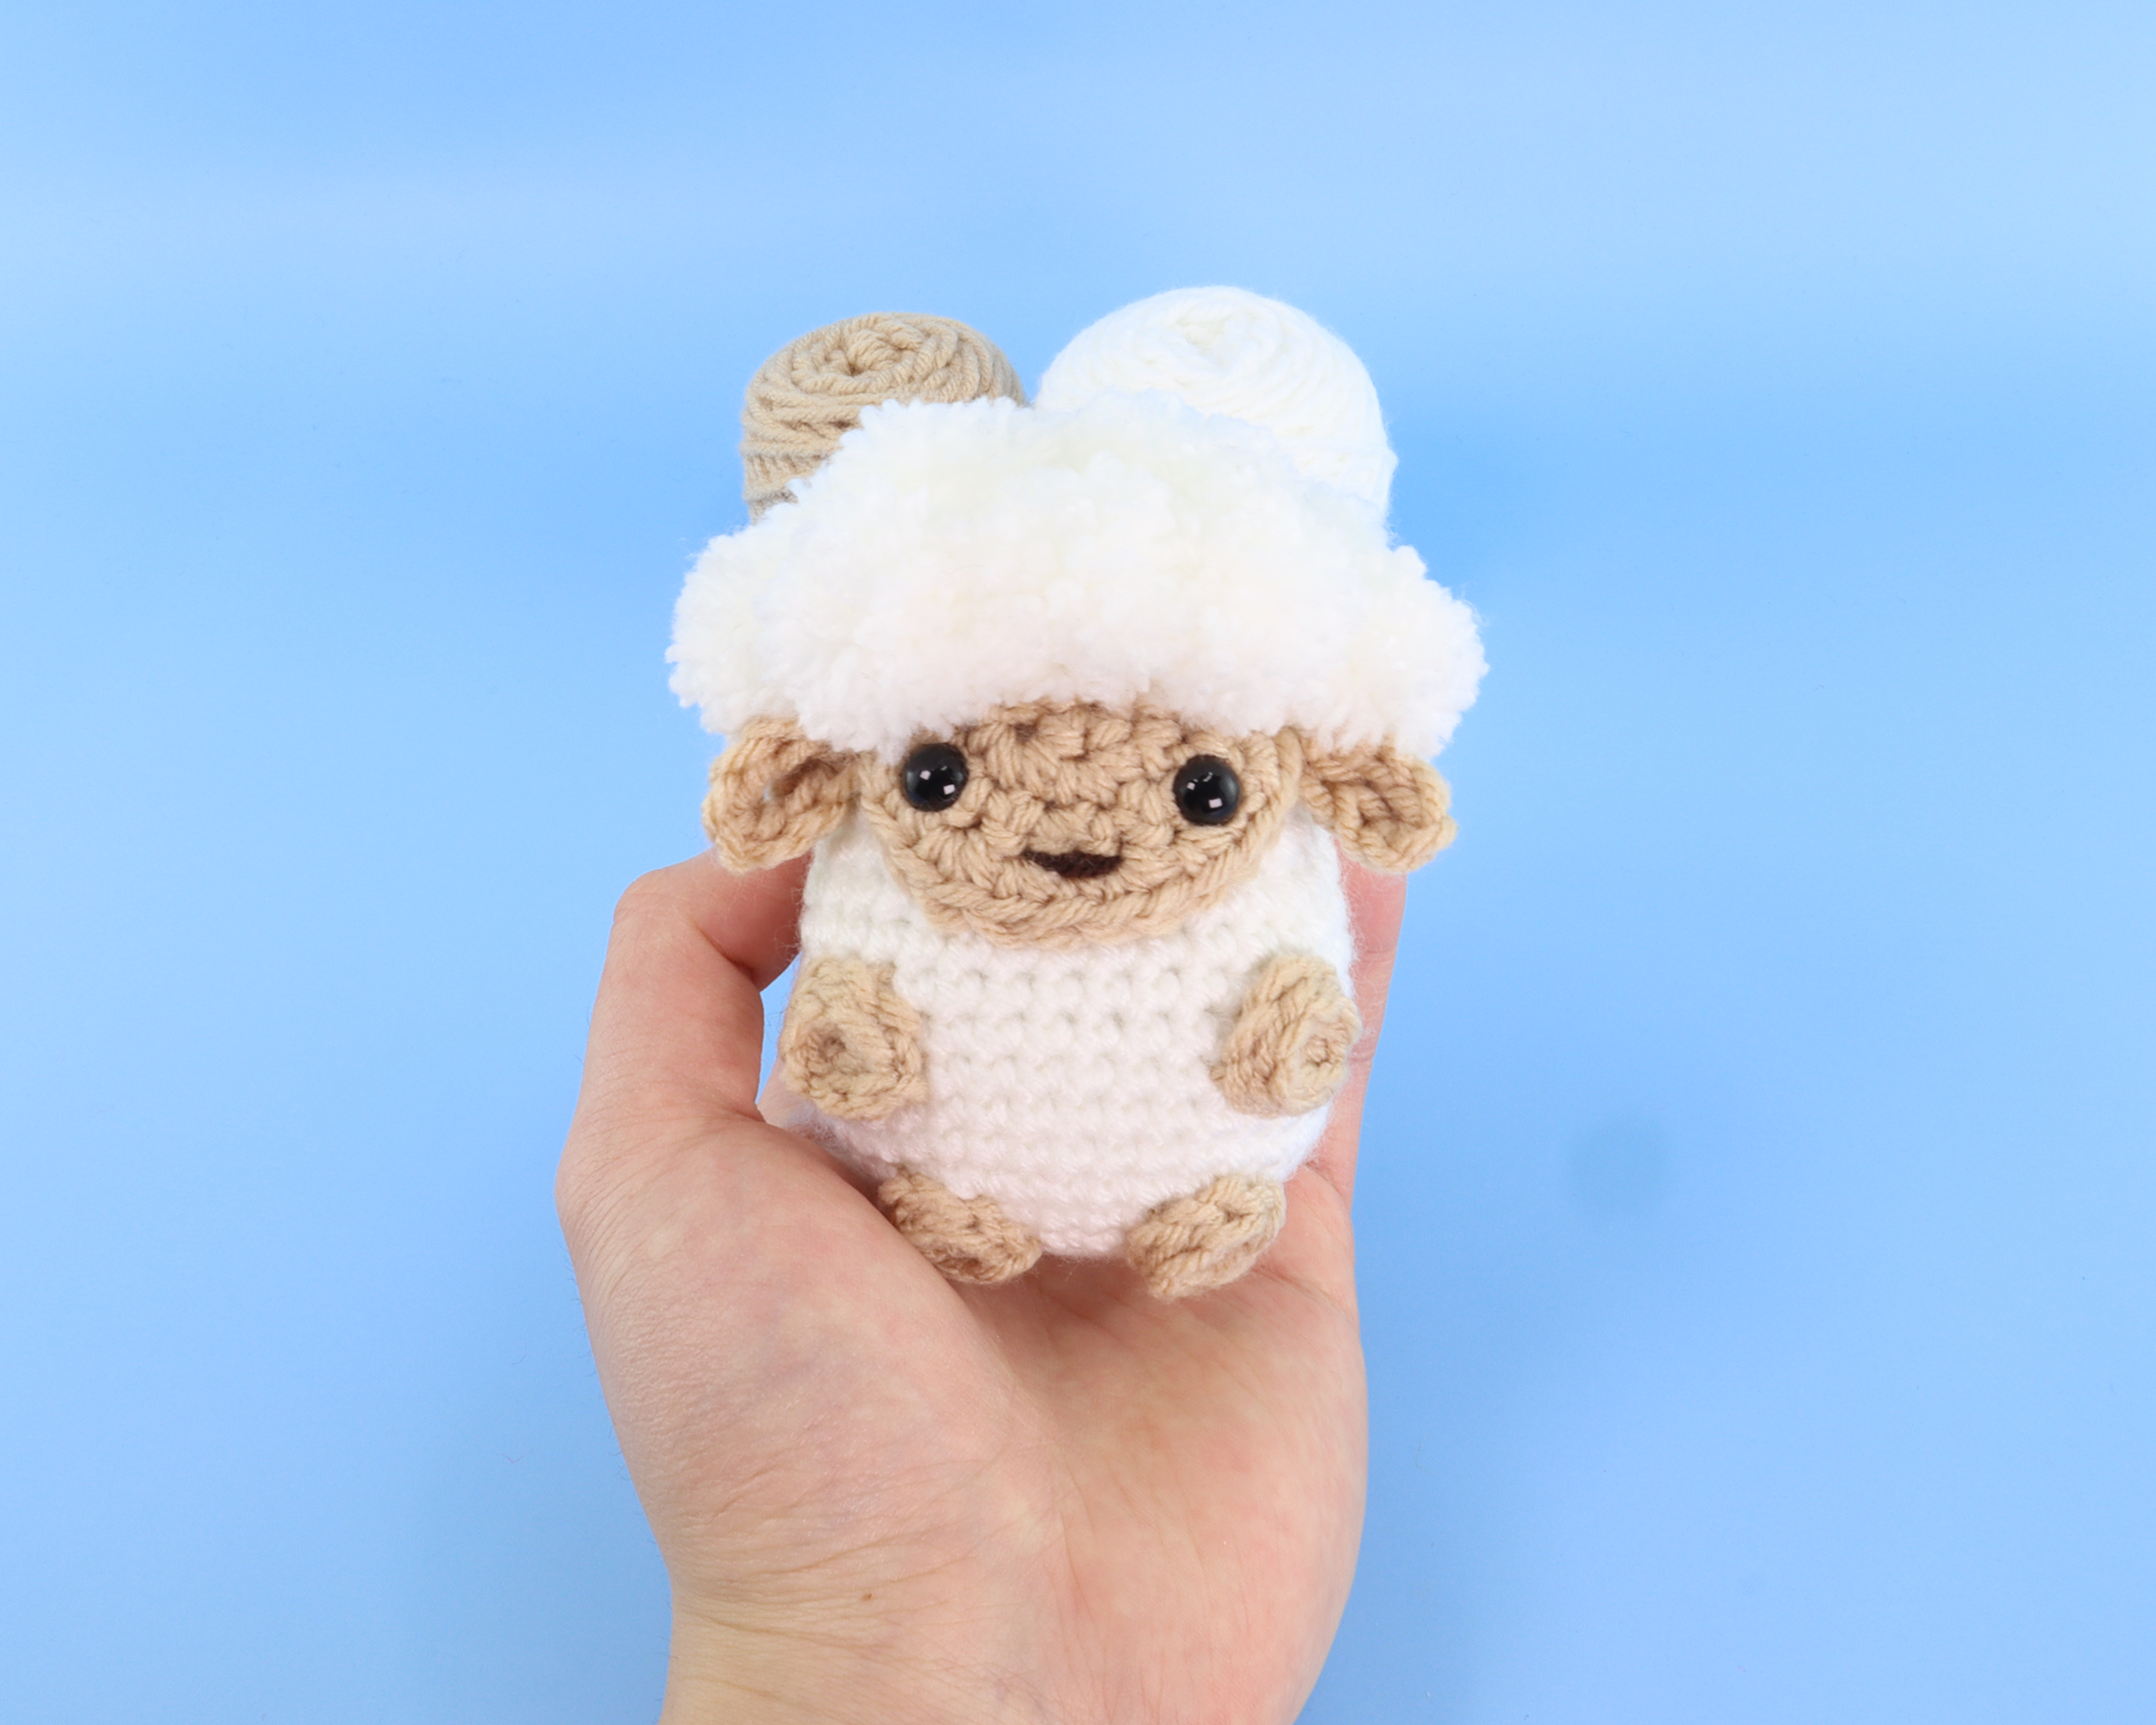 Wooly The Sheep Crochet Kit